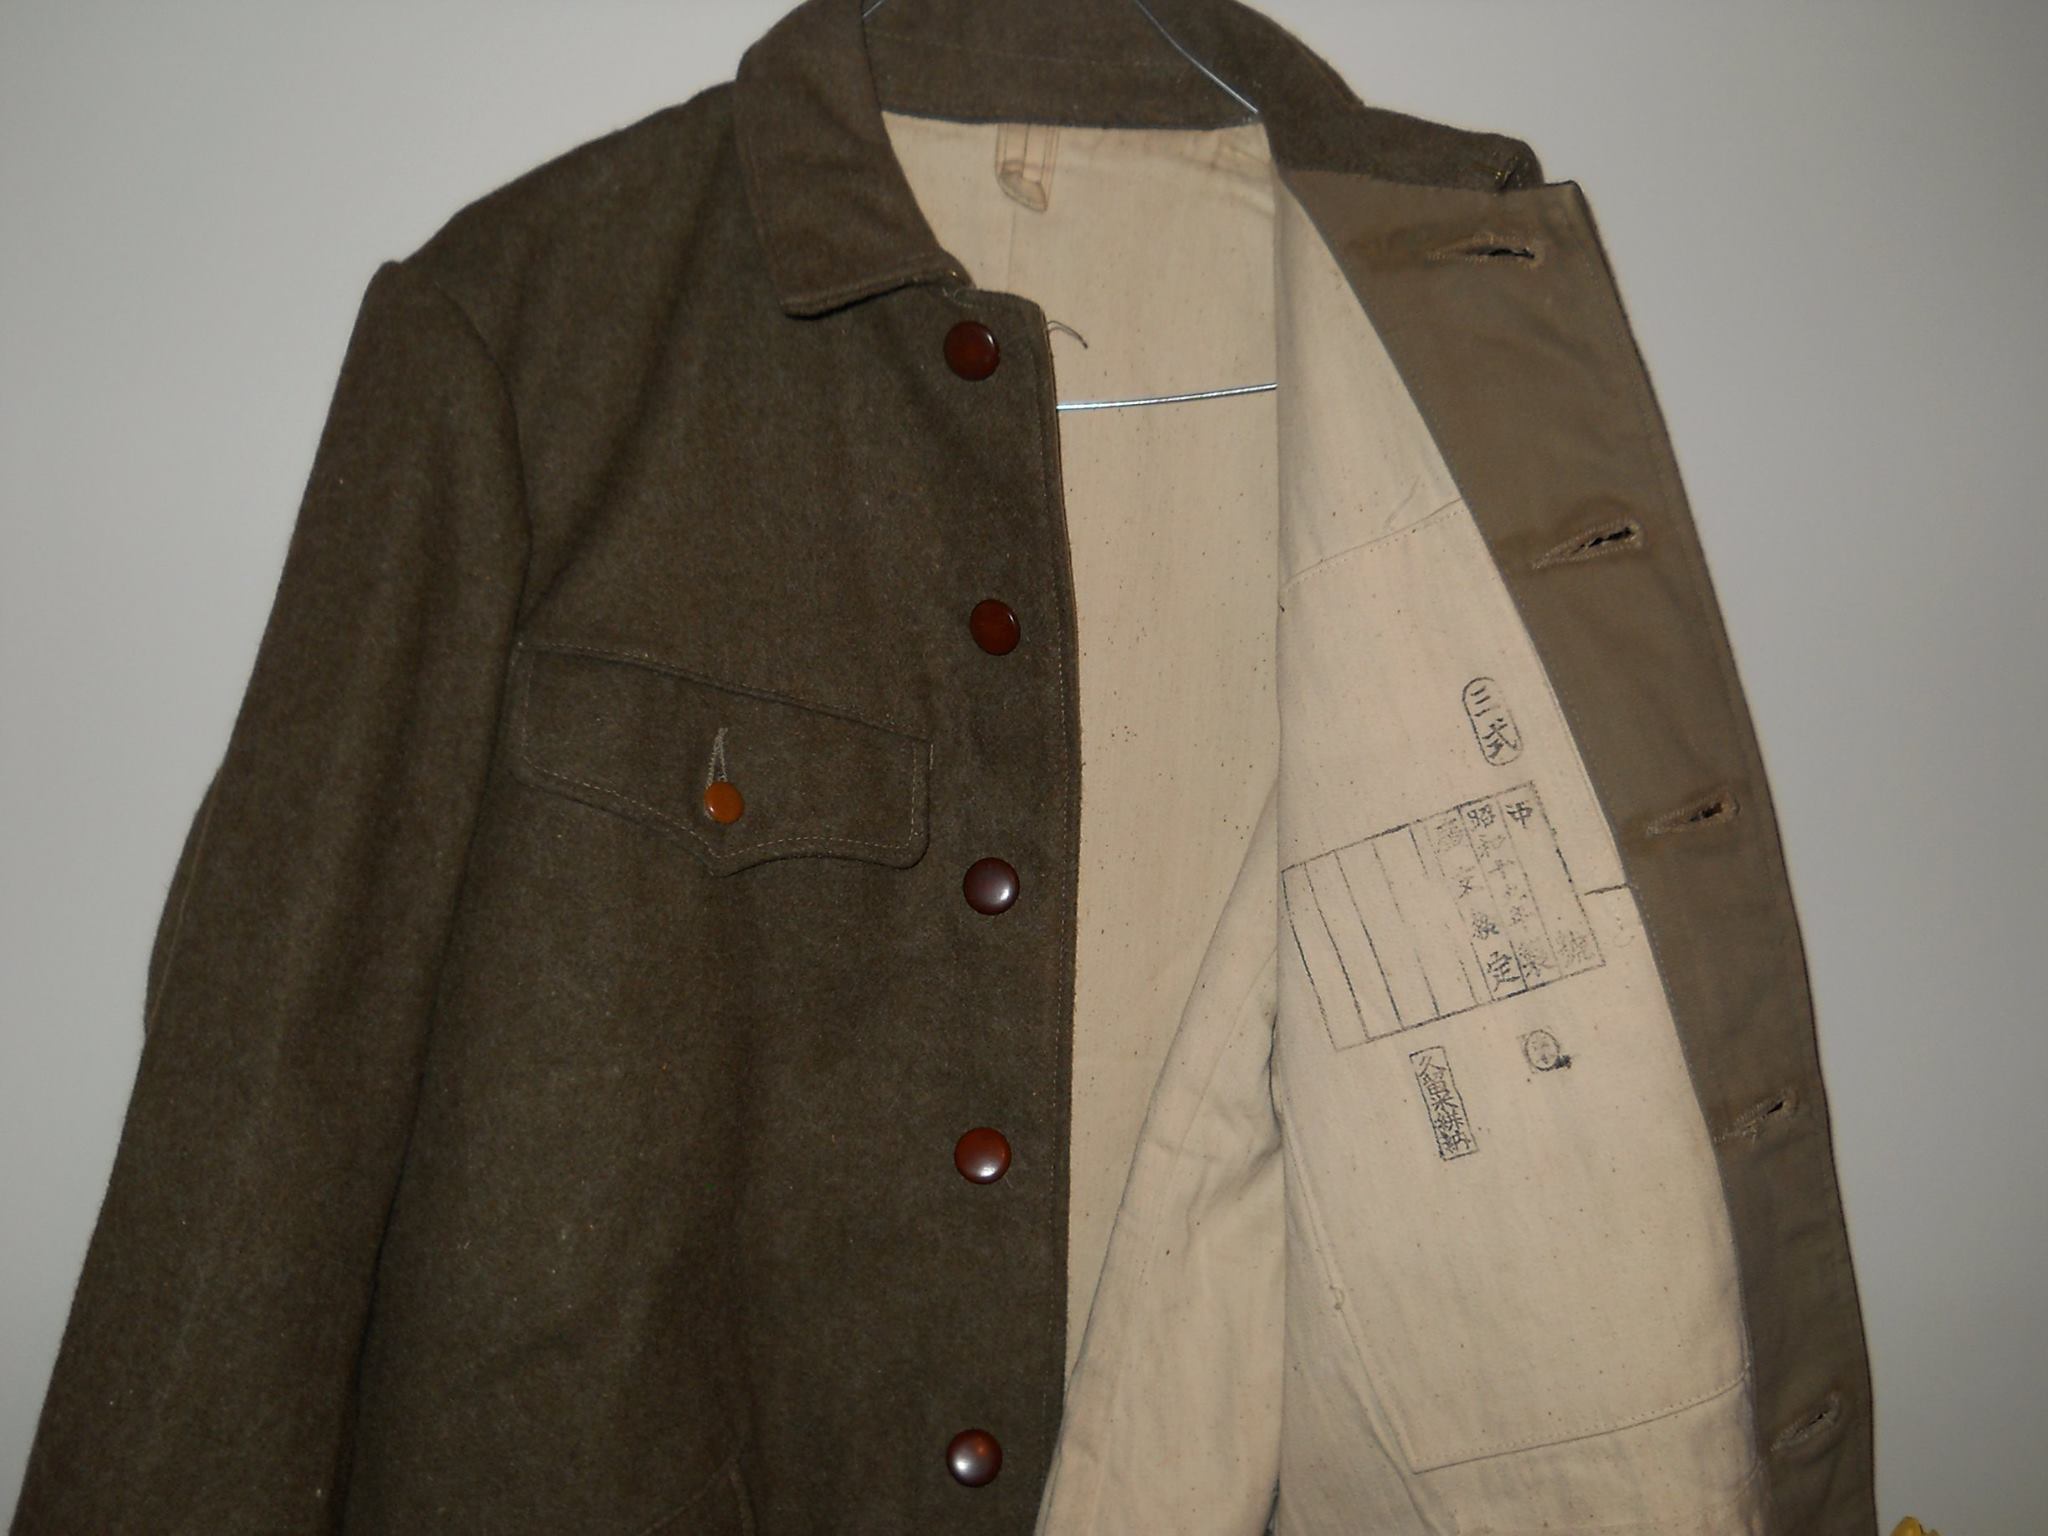 Is this a WW2 uniform?